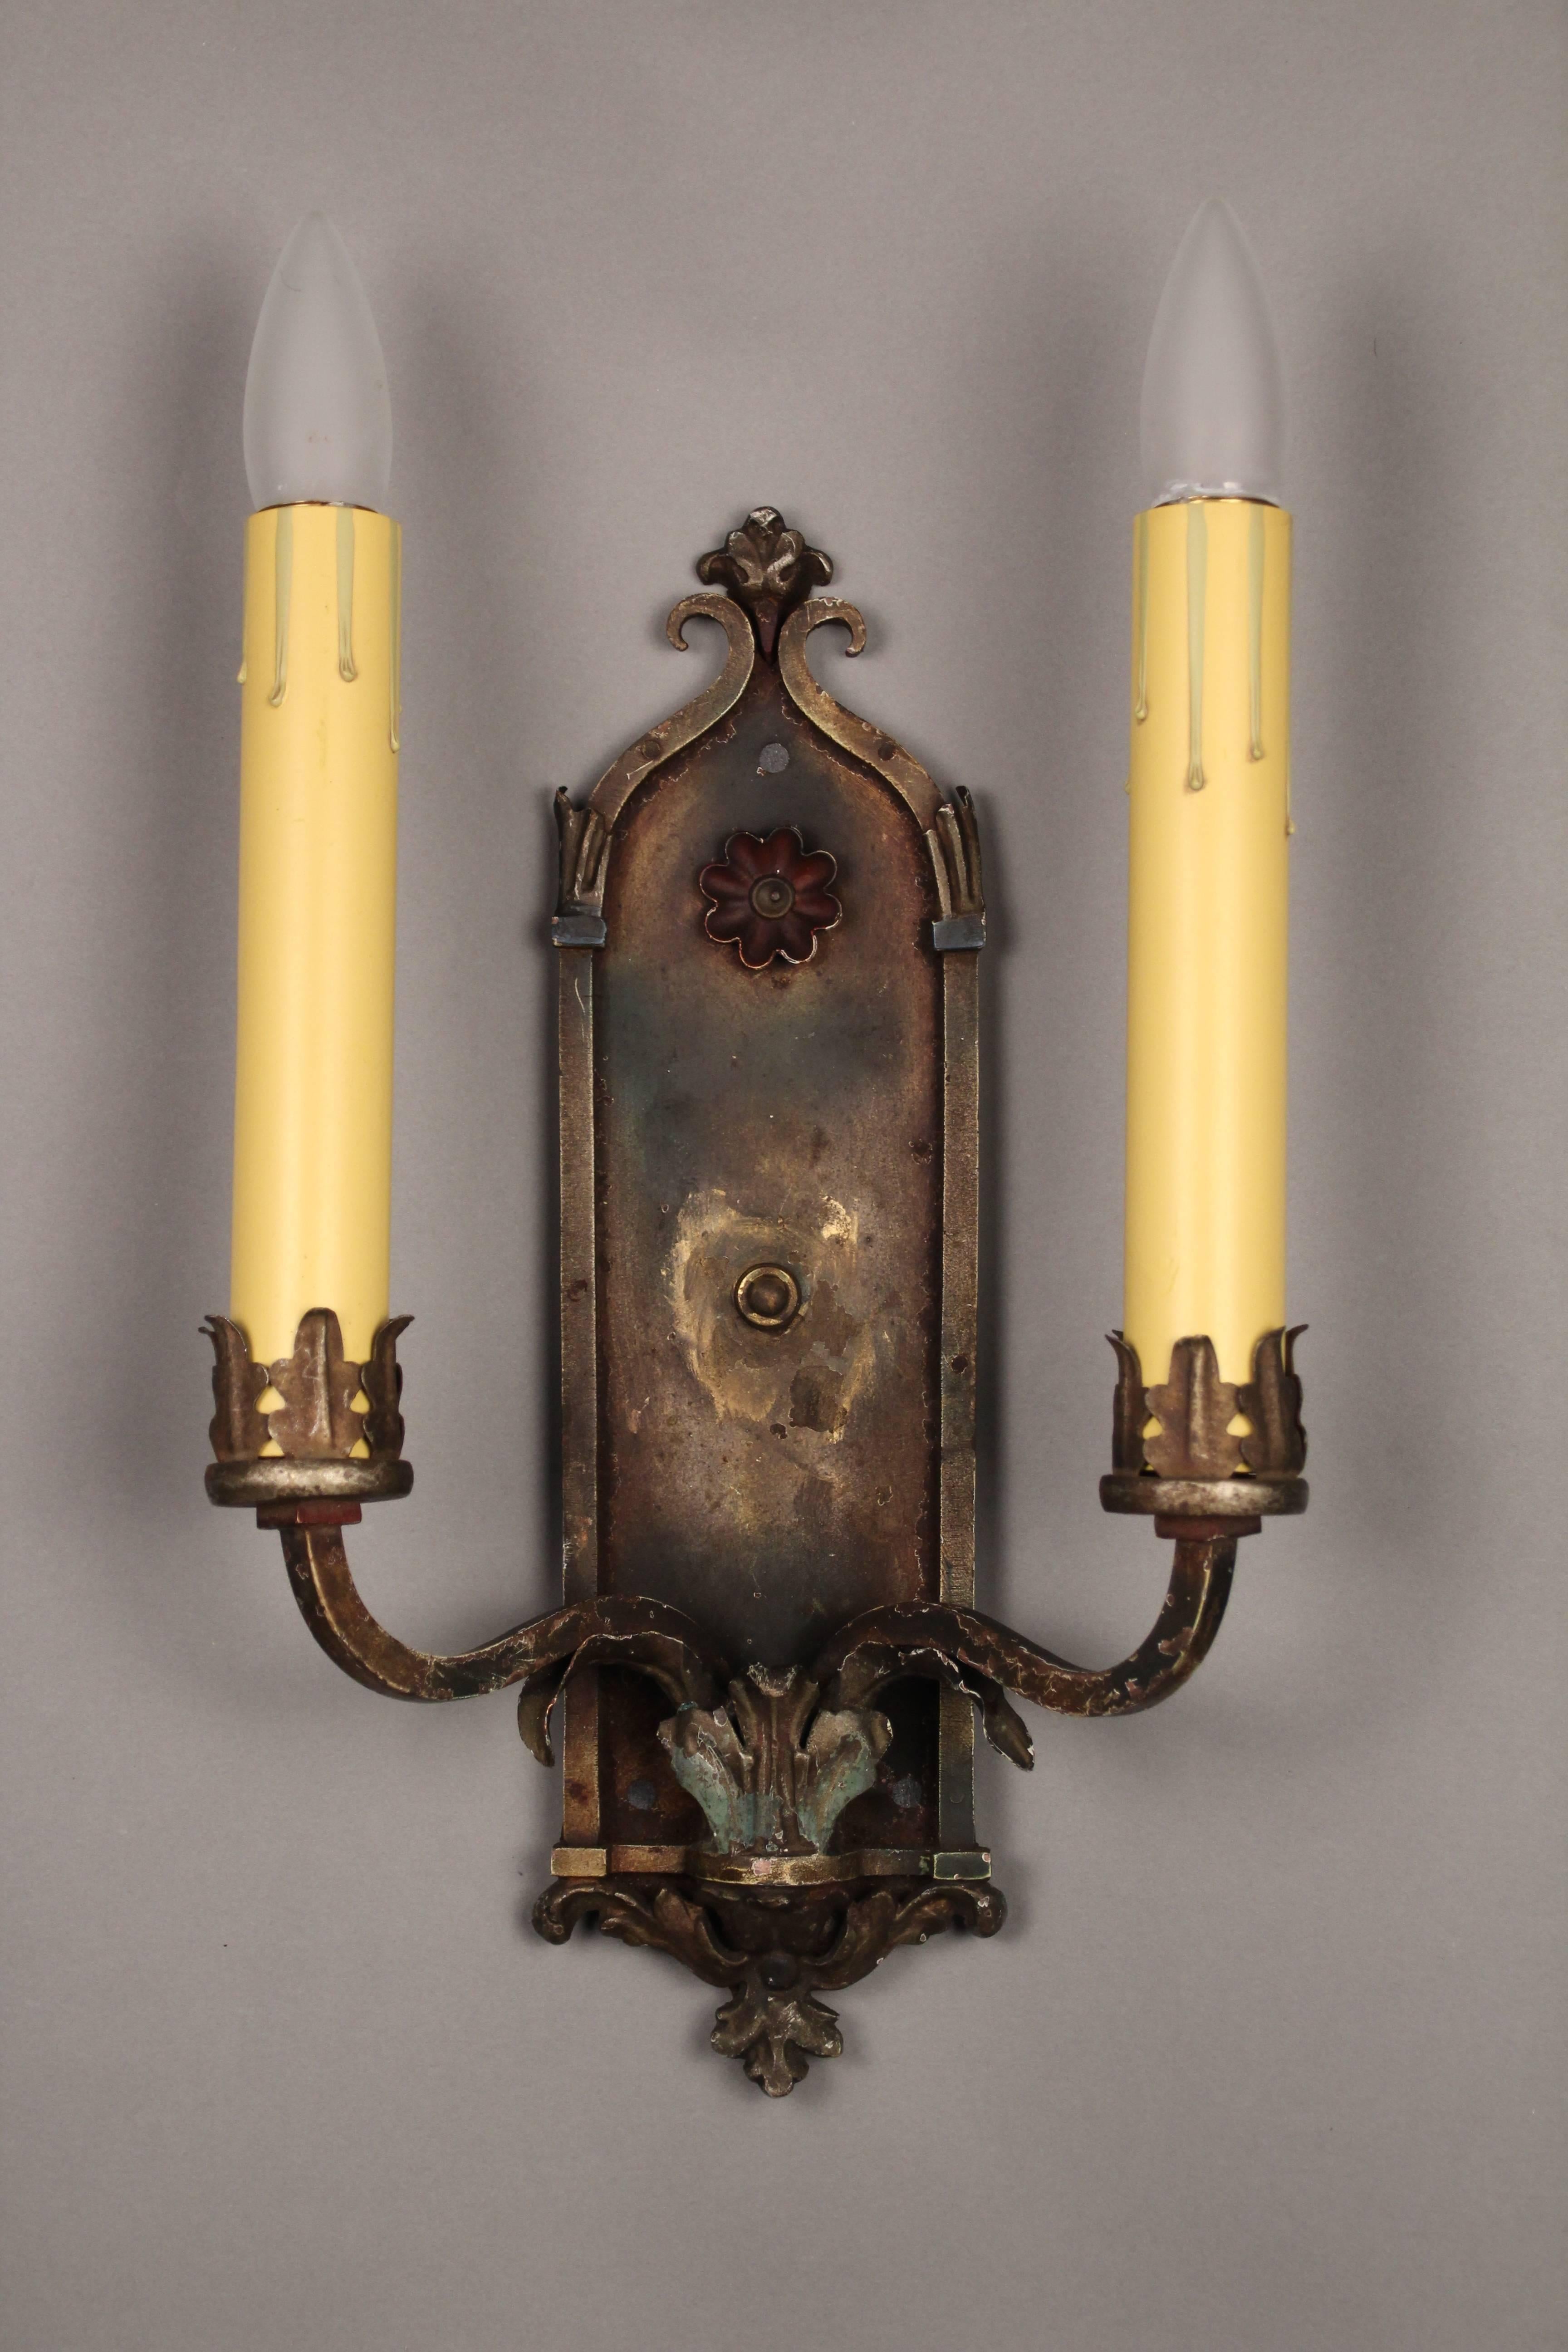 Hard to find tall double sconces. Would fit nicely in Spanish Revival or Tudor homes. Sconces with original finish, circa 1920s. Measures: 14.25